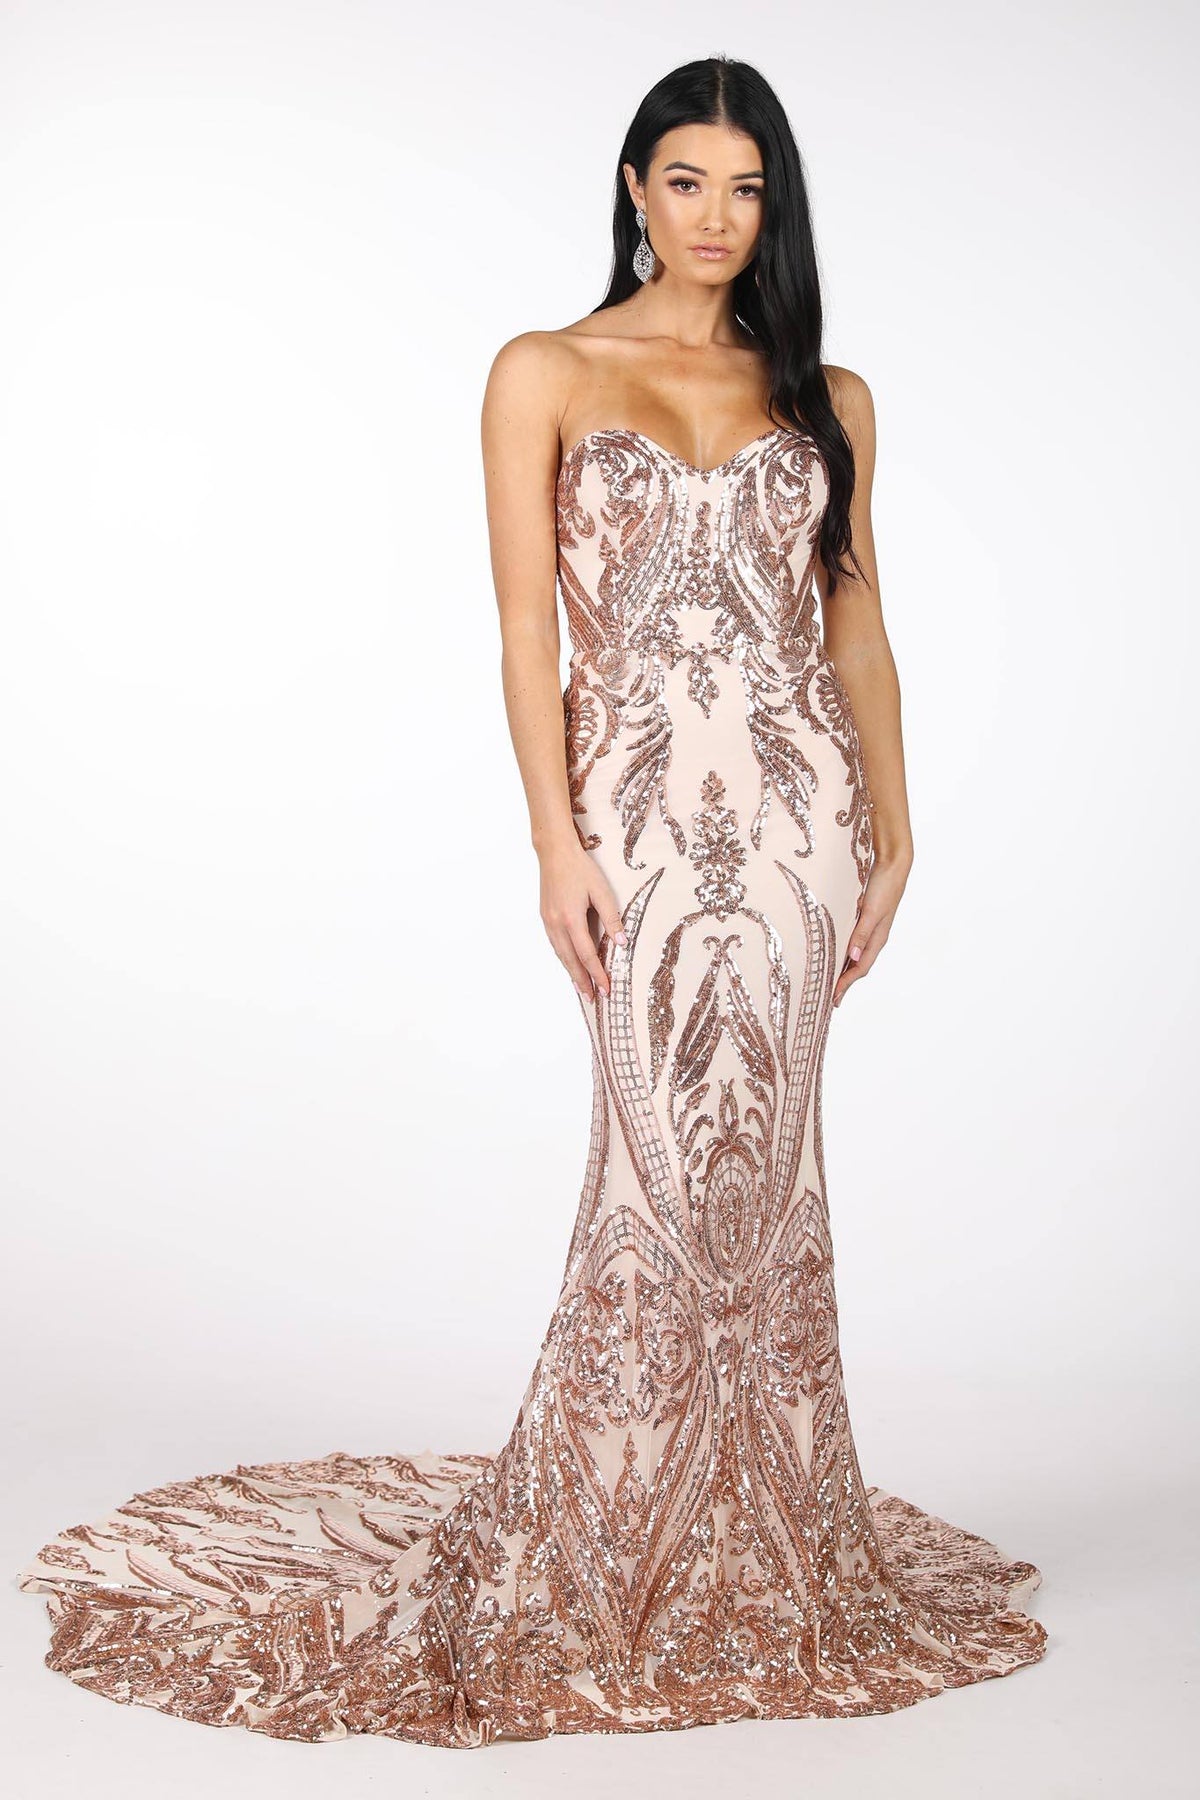 Rose Gold Embroidered Pattern Sequin with Light Pink Lining Floor Length Evening Dress with Strapless Sweetheart Neckline and Mermaid Skirt